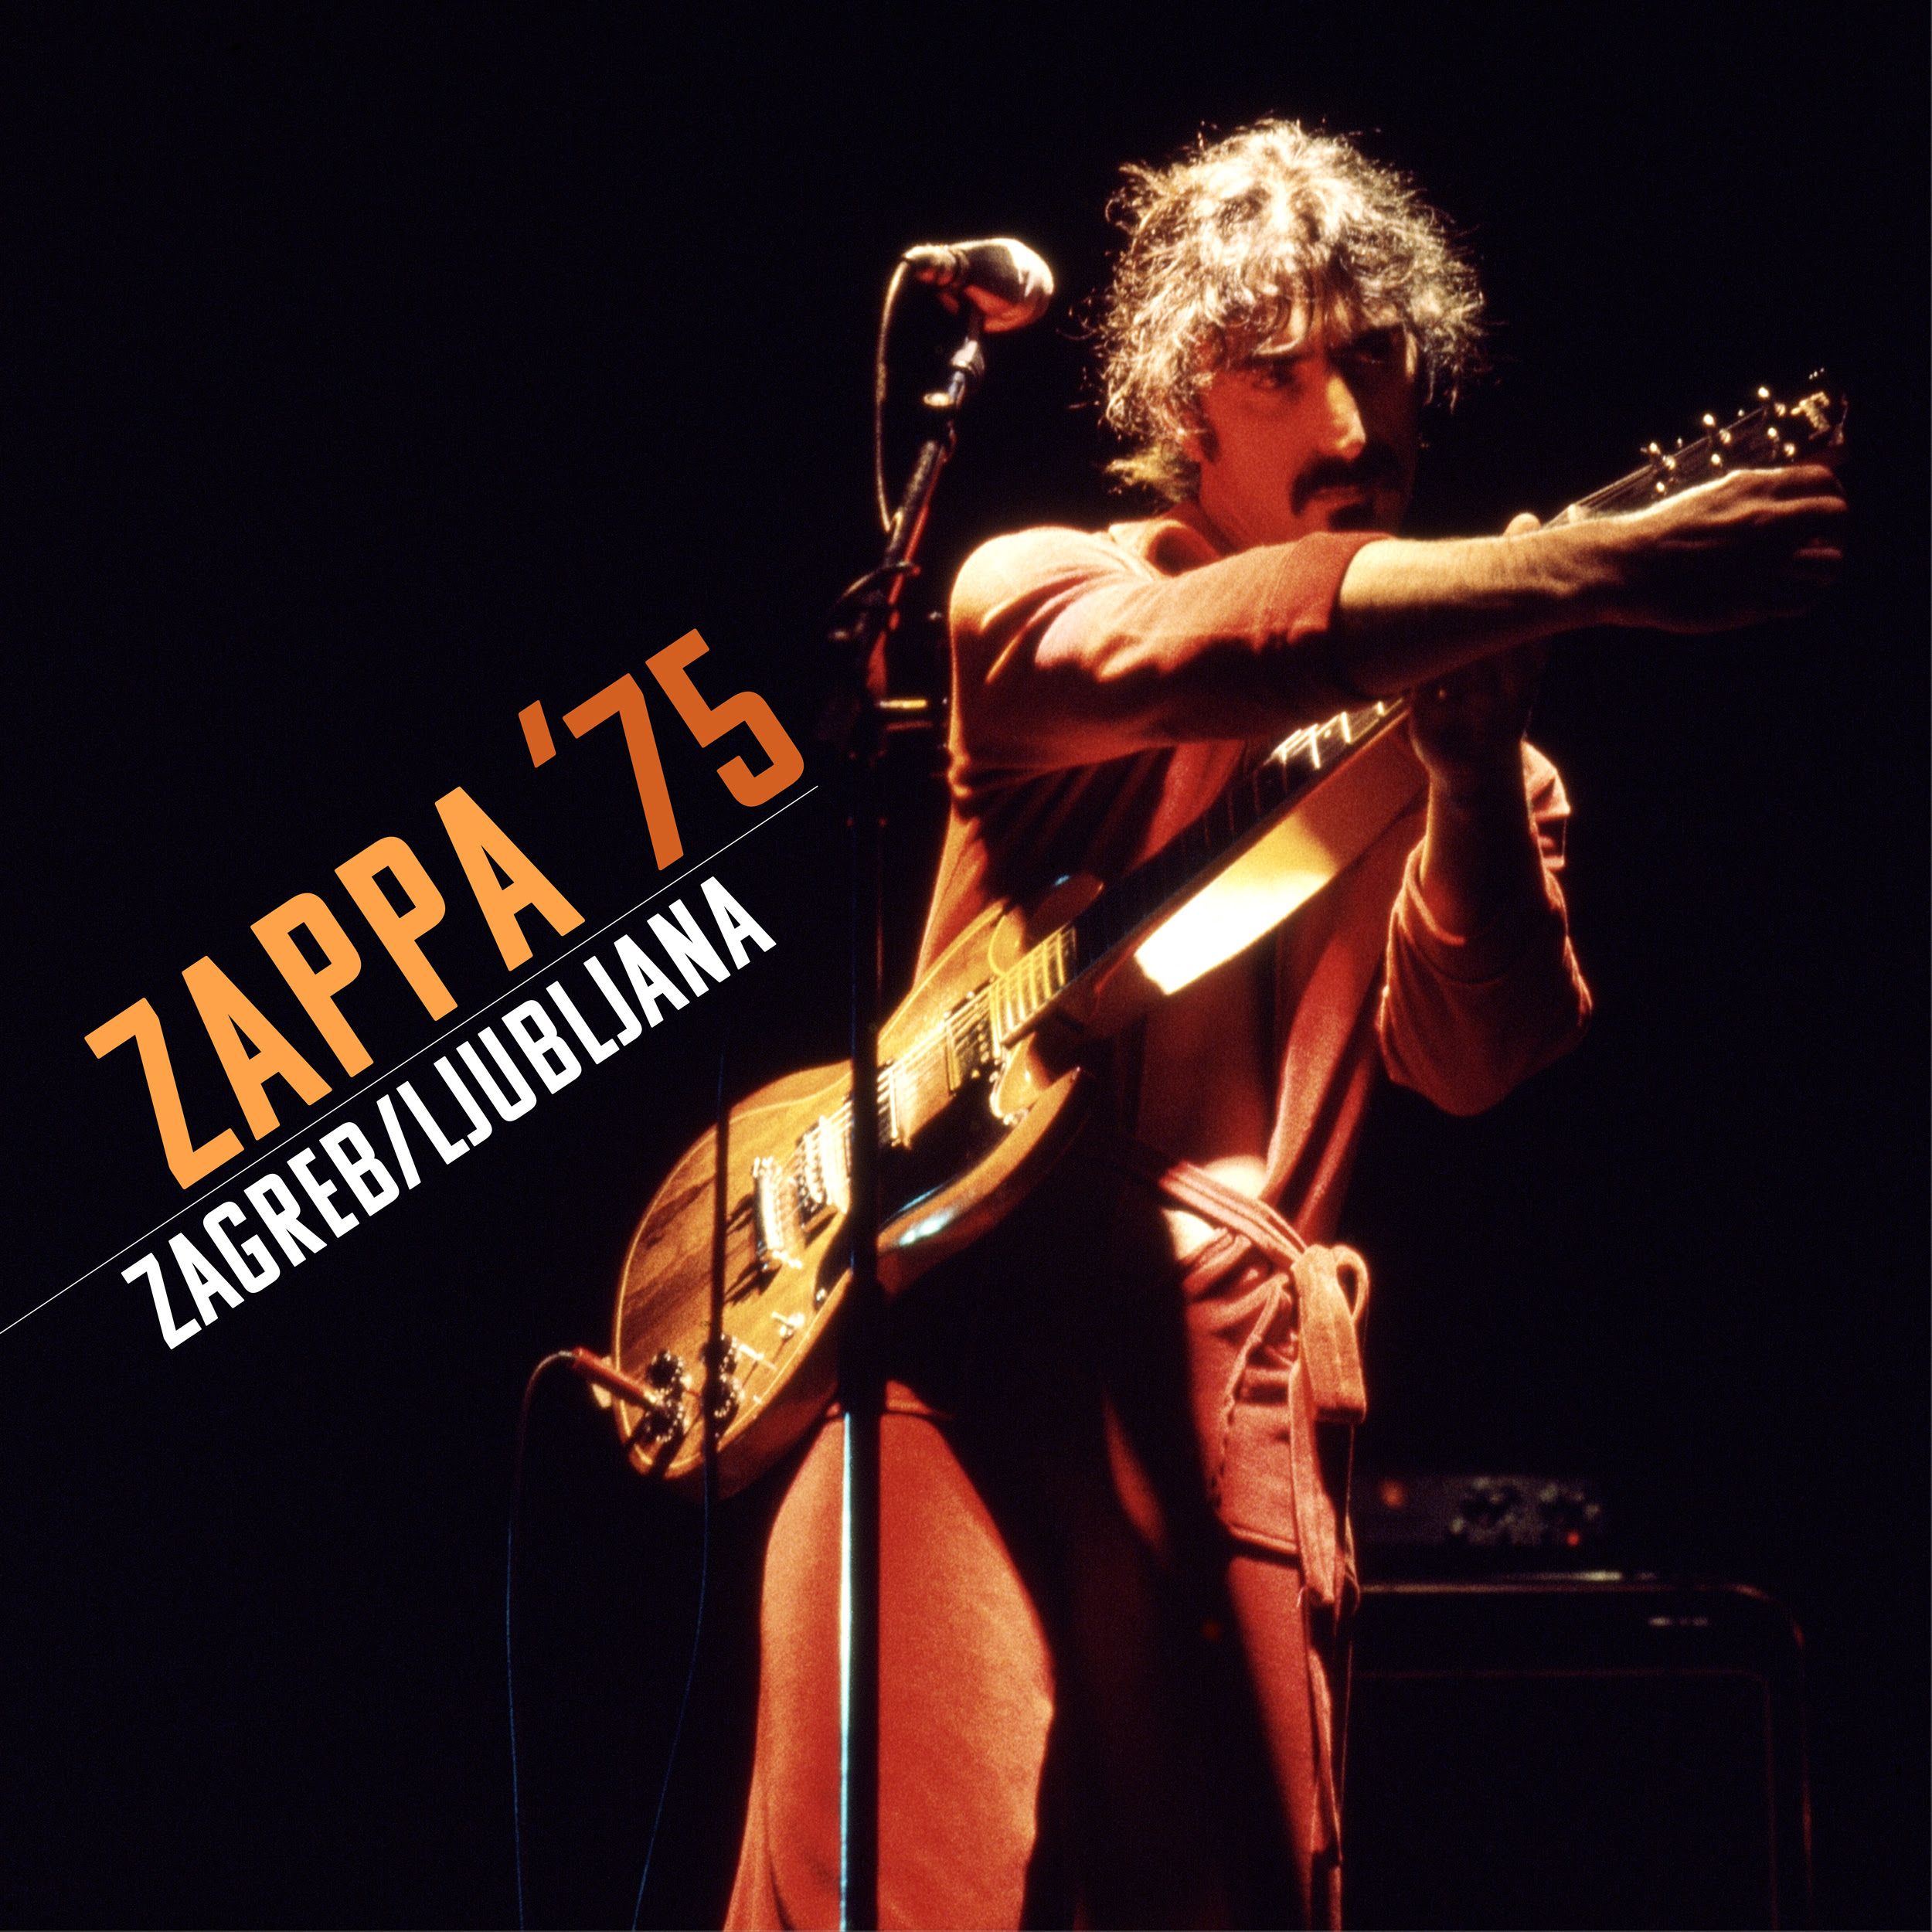 Frank Zappa's Sole 1975 Yugoslavian Shows With Rare Lineup Of The Mothers To Be Released As "Zappa '75: Zagreb/Ljubljana" Due 10/14 Via Zappa Records/UMe